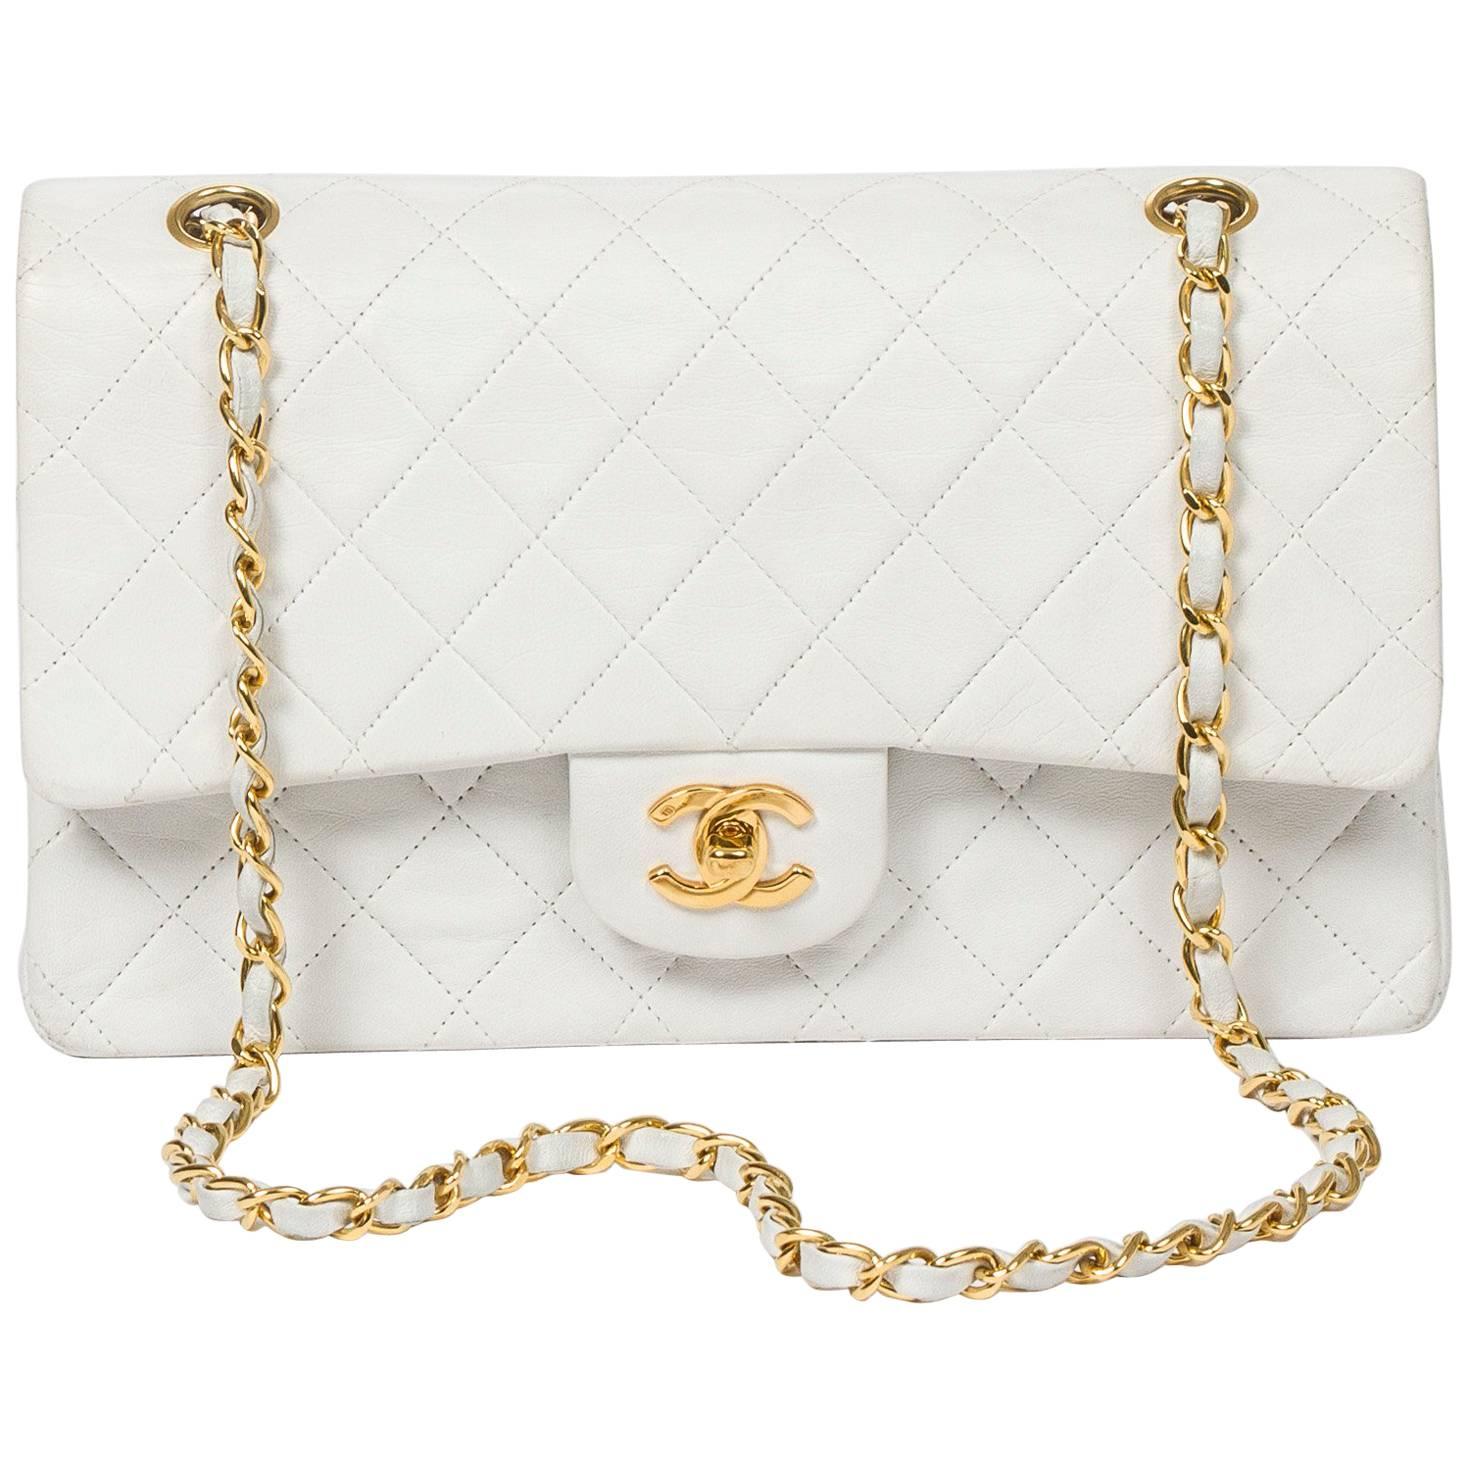 Chanel Classic Double Flap White Leather 26cm